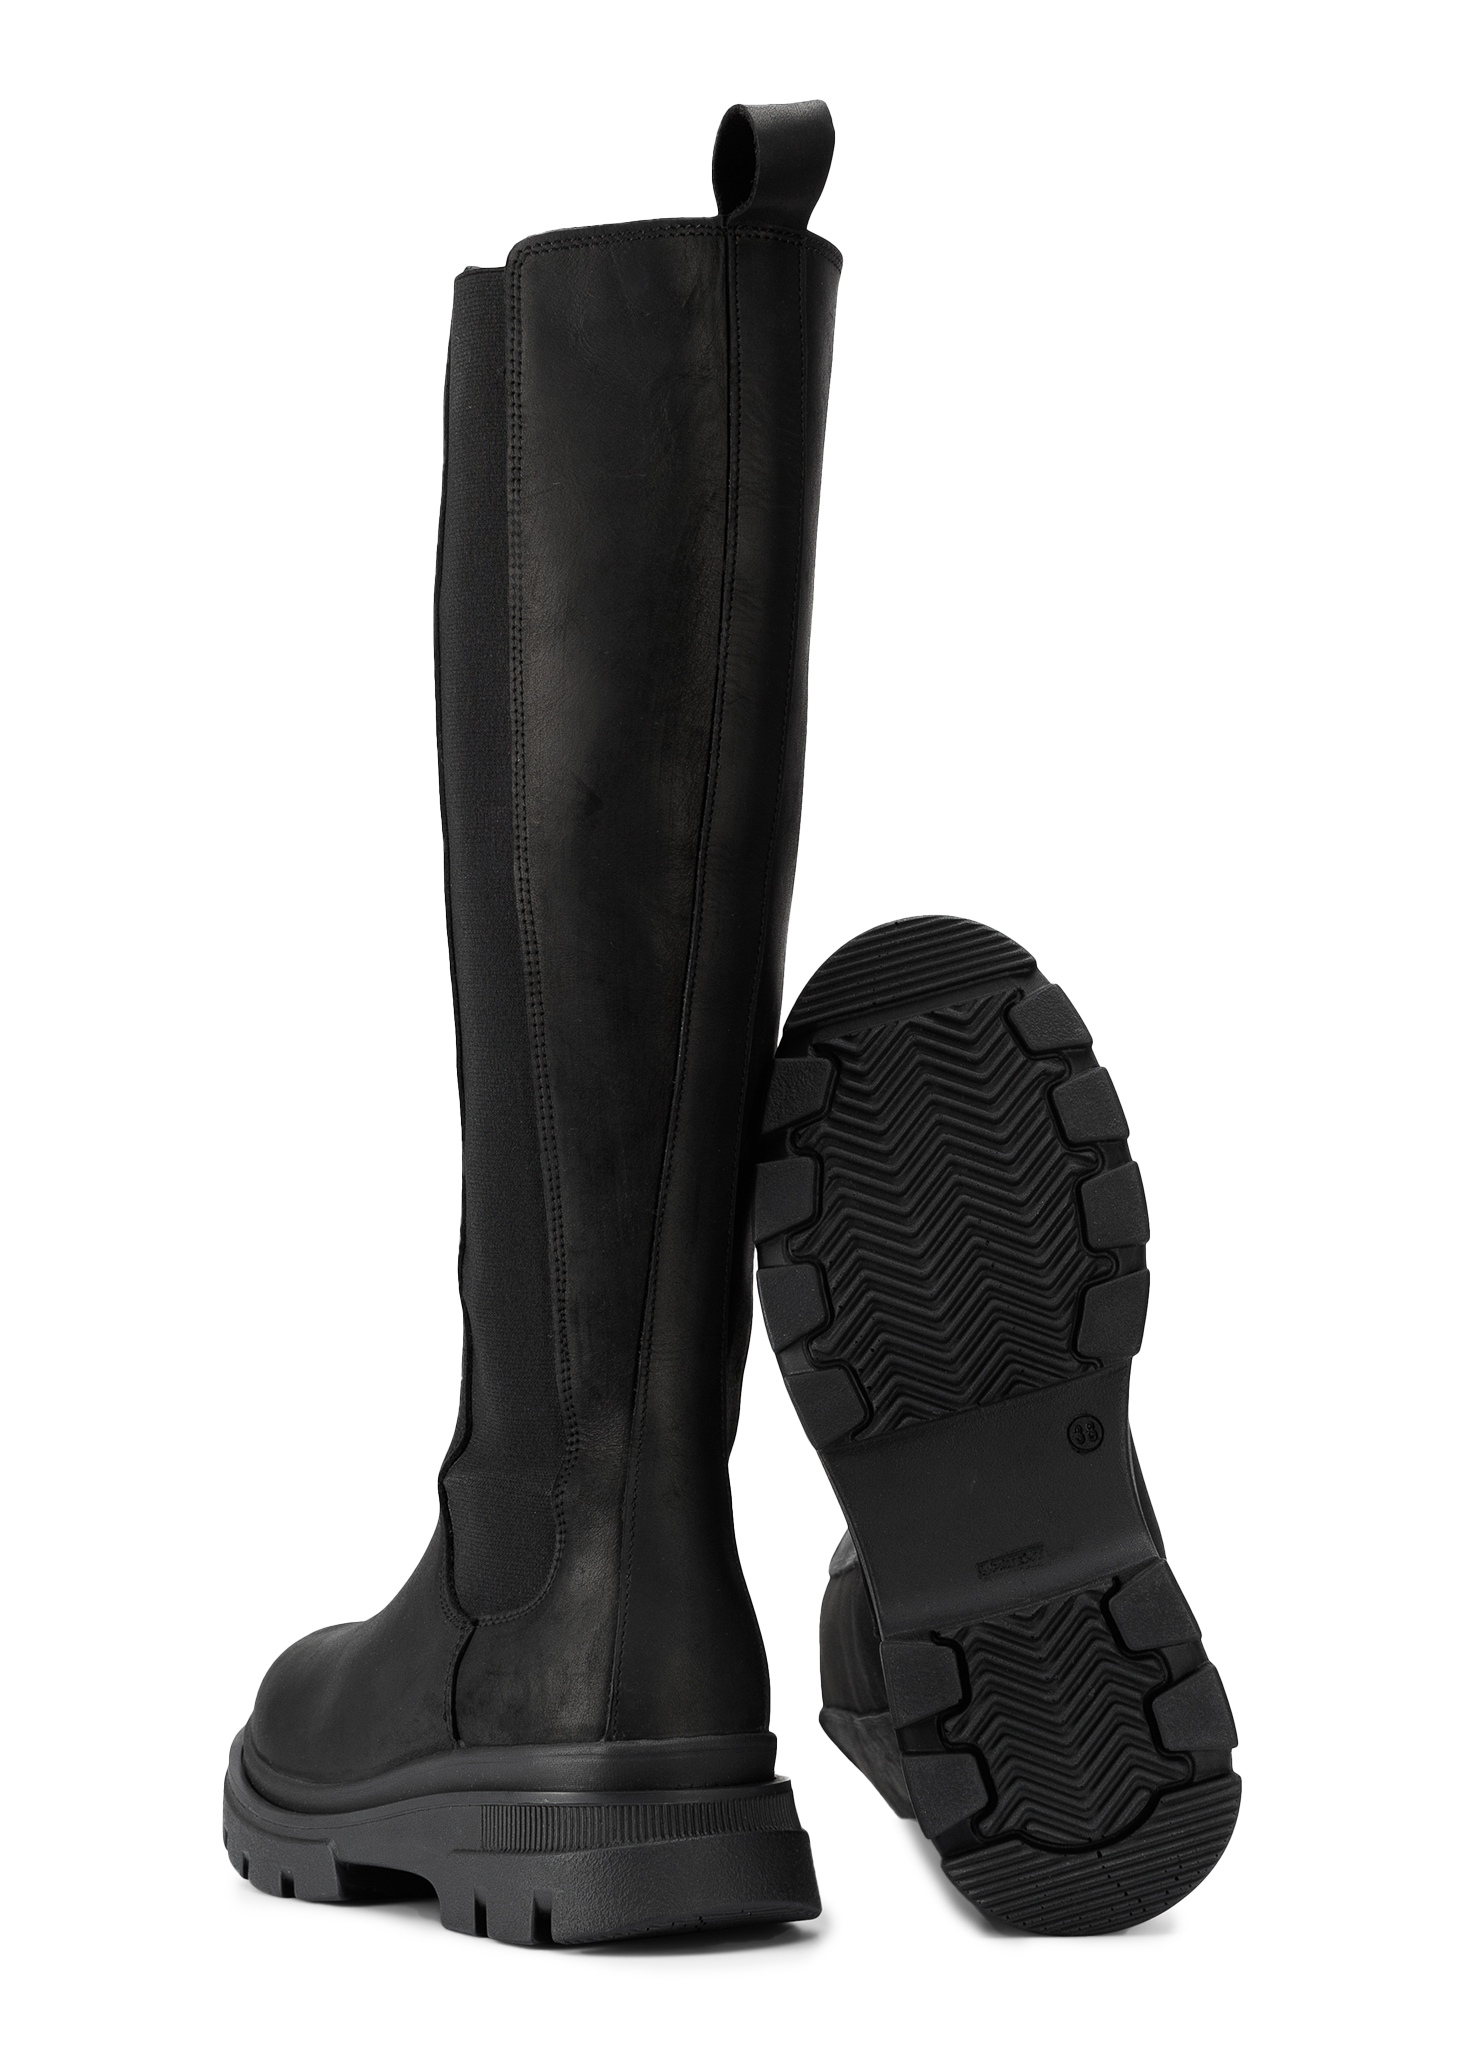 BRGN Slim High Boots Shoes 095 New Black